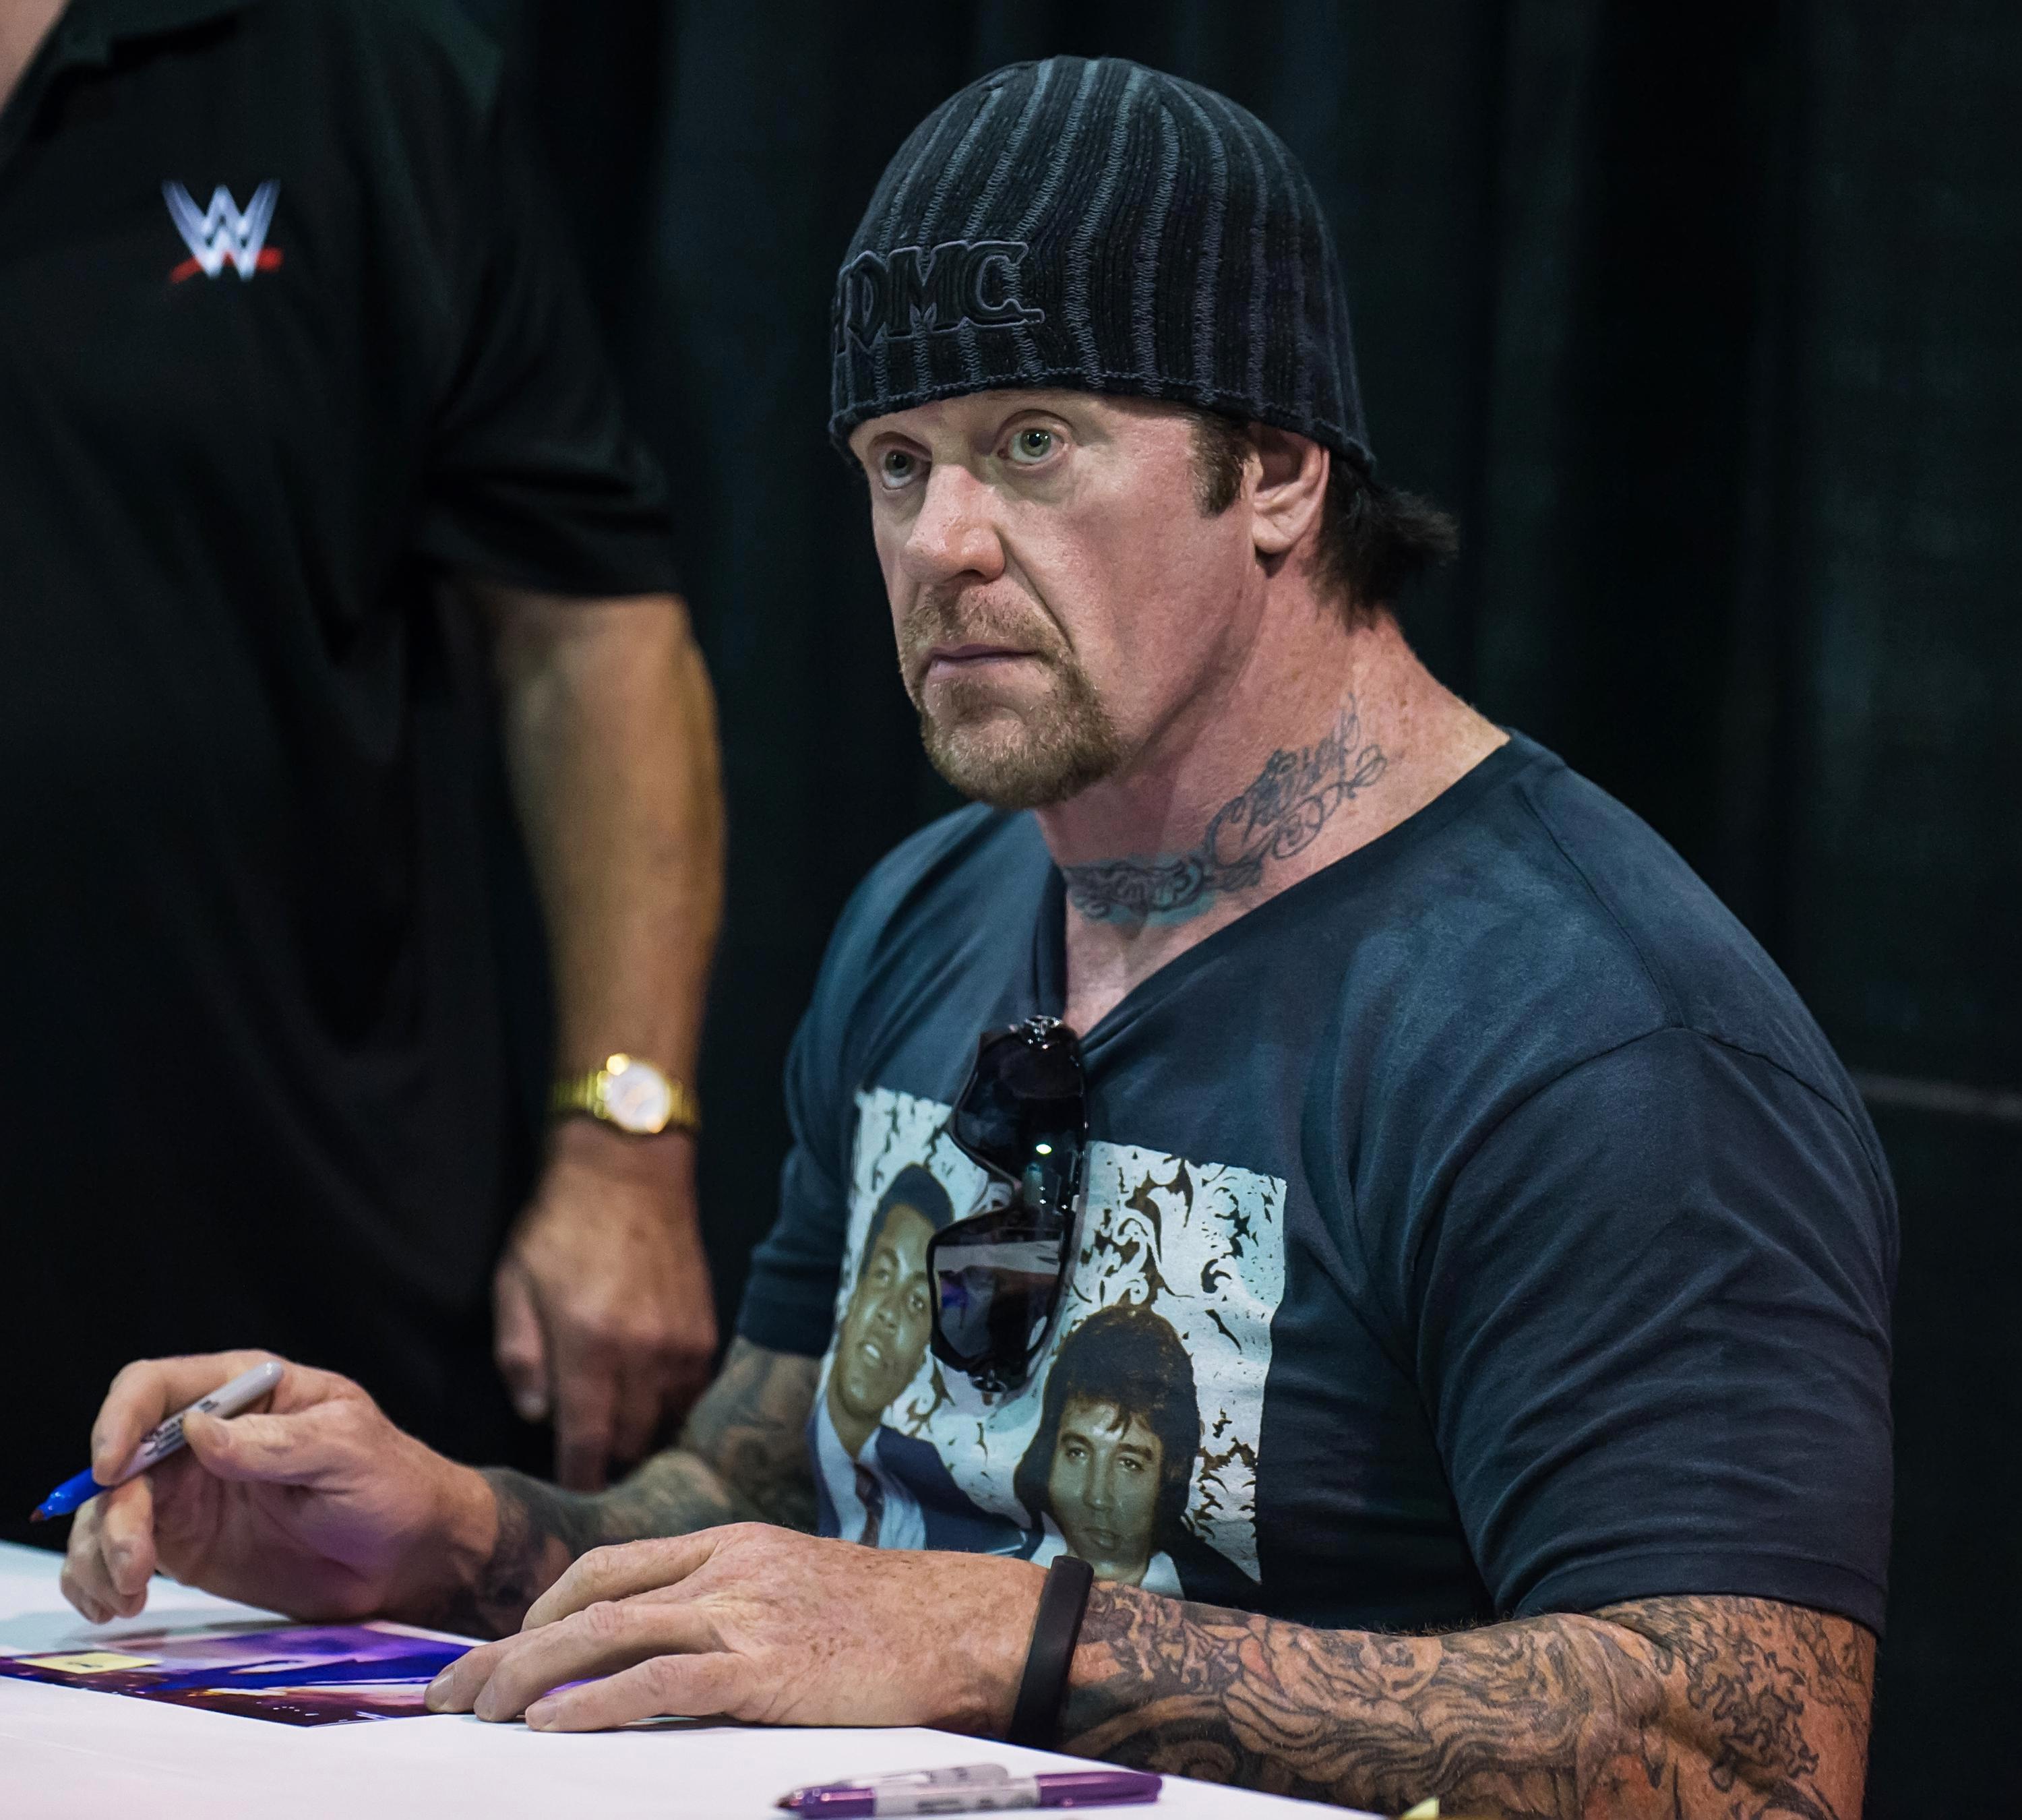 Who is The Undertaker, was there more than one and is the WWE.